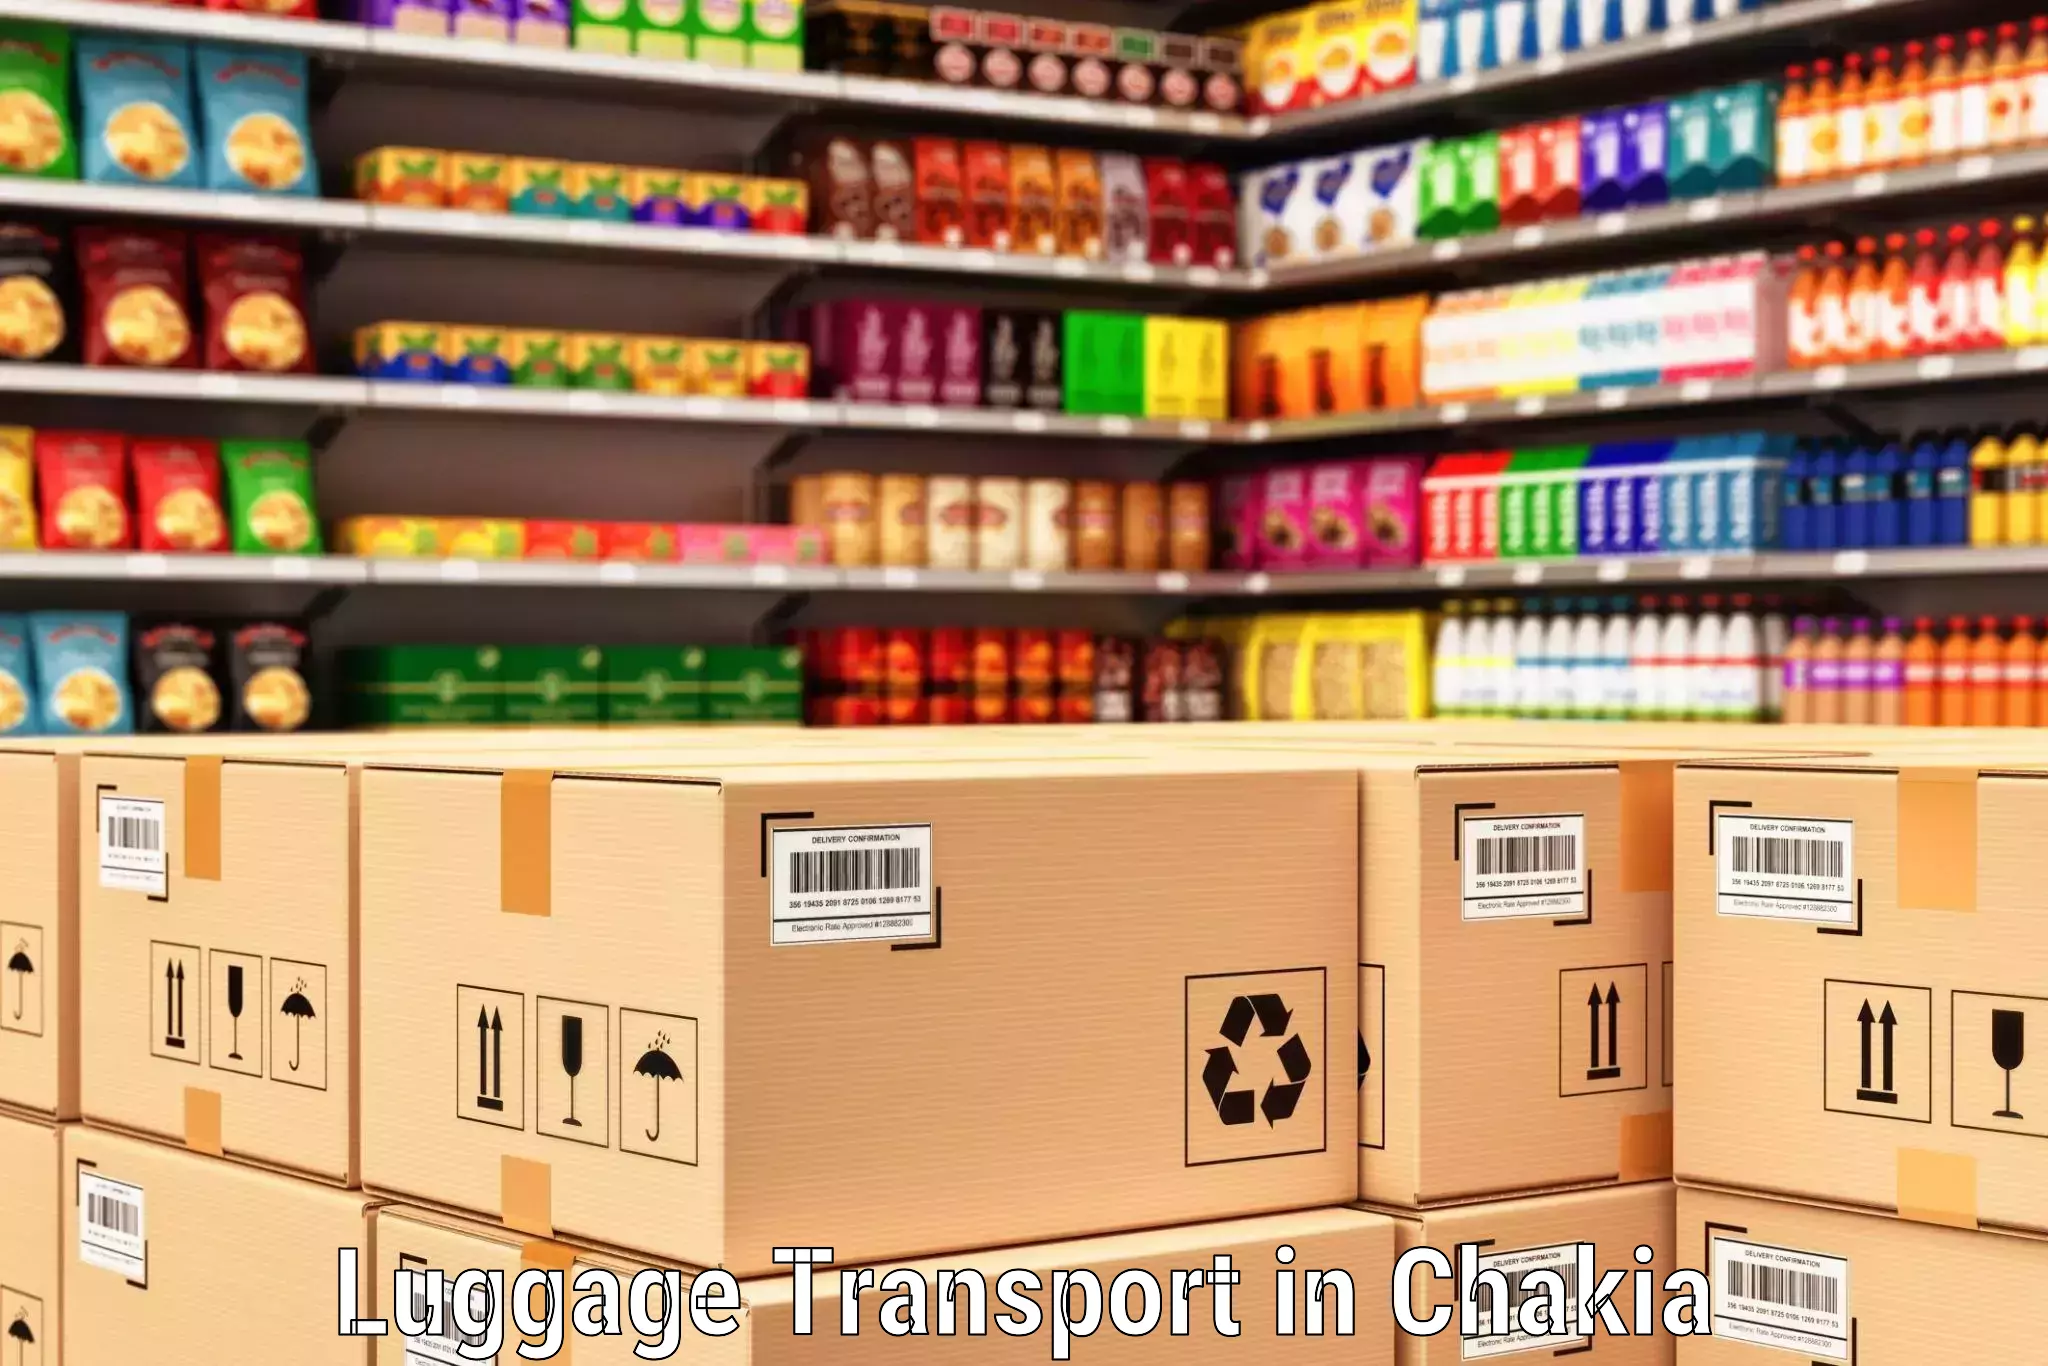 Simplified luggage transport in Chakia